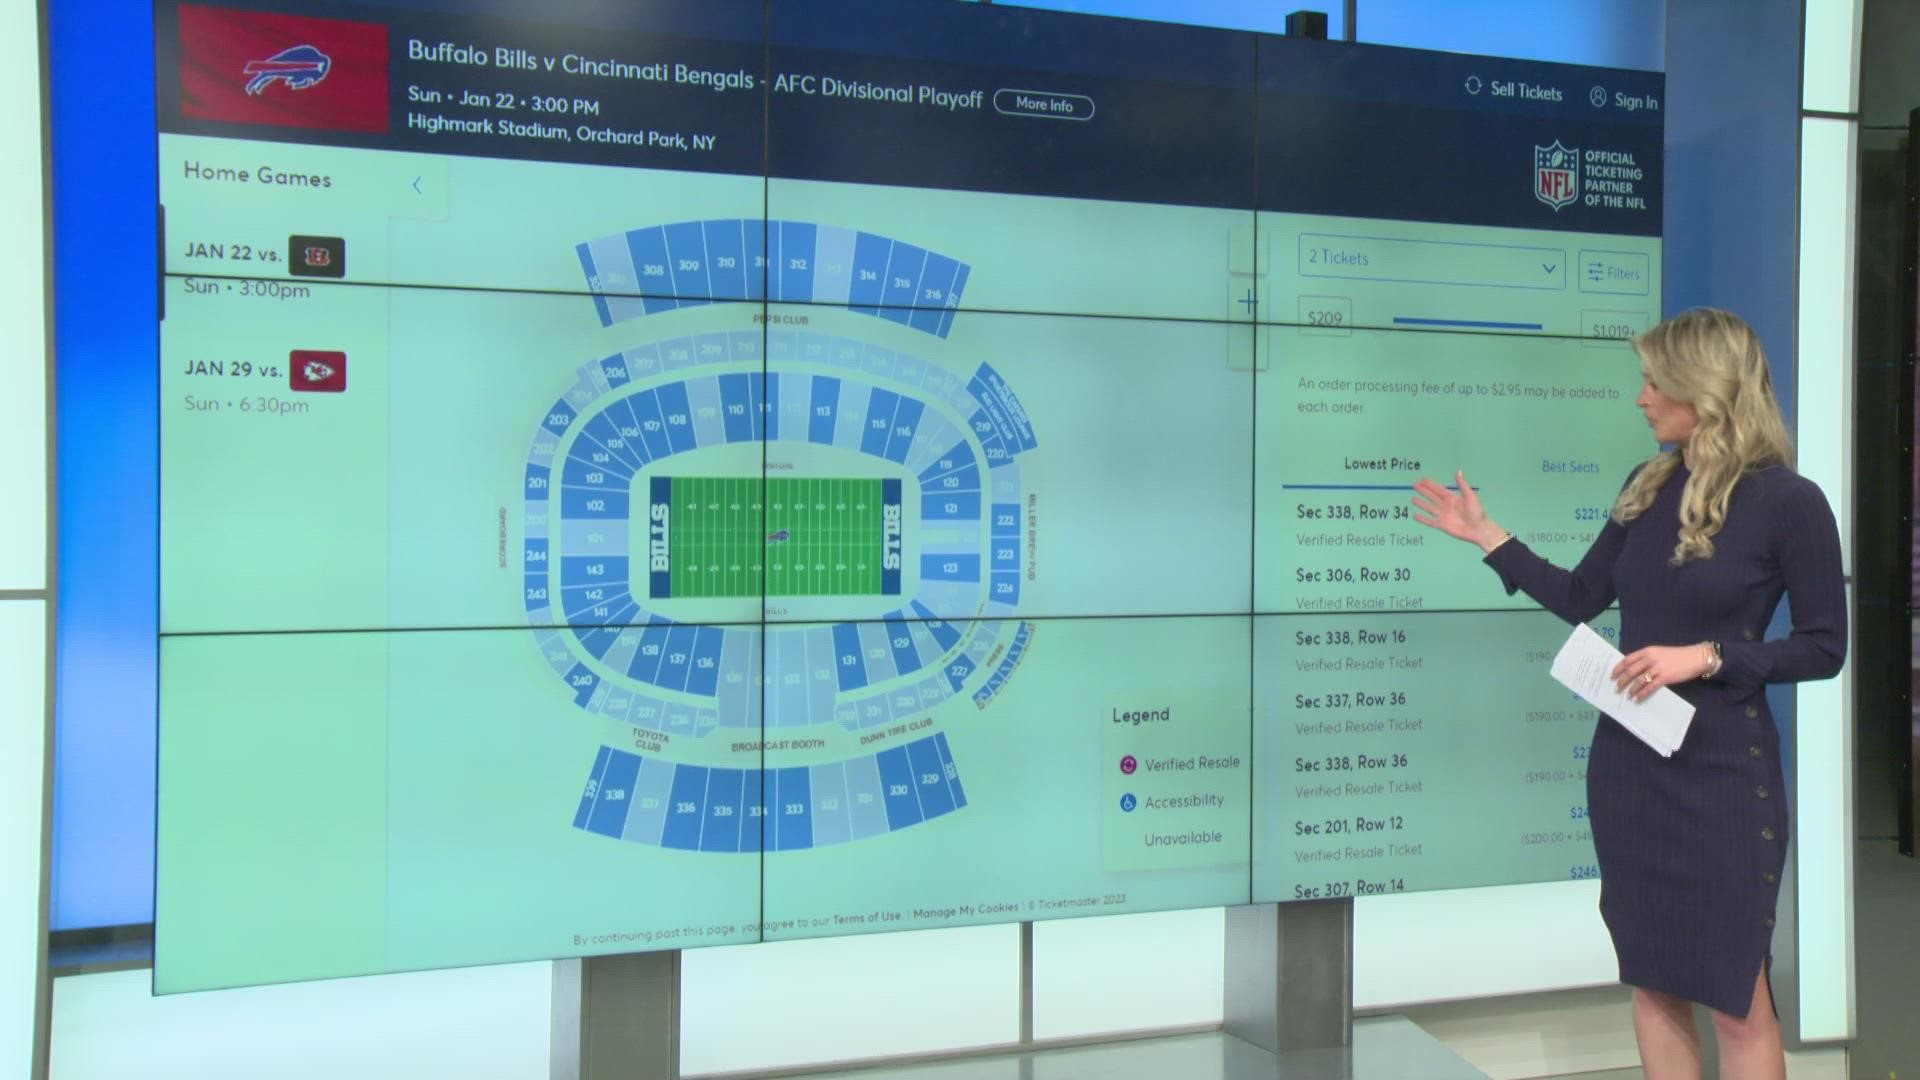 As of Wednesday, the lowest priced seats are more than $200 on Ticketmaster and Stubhub.